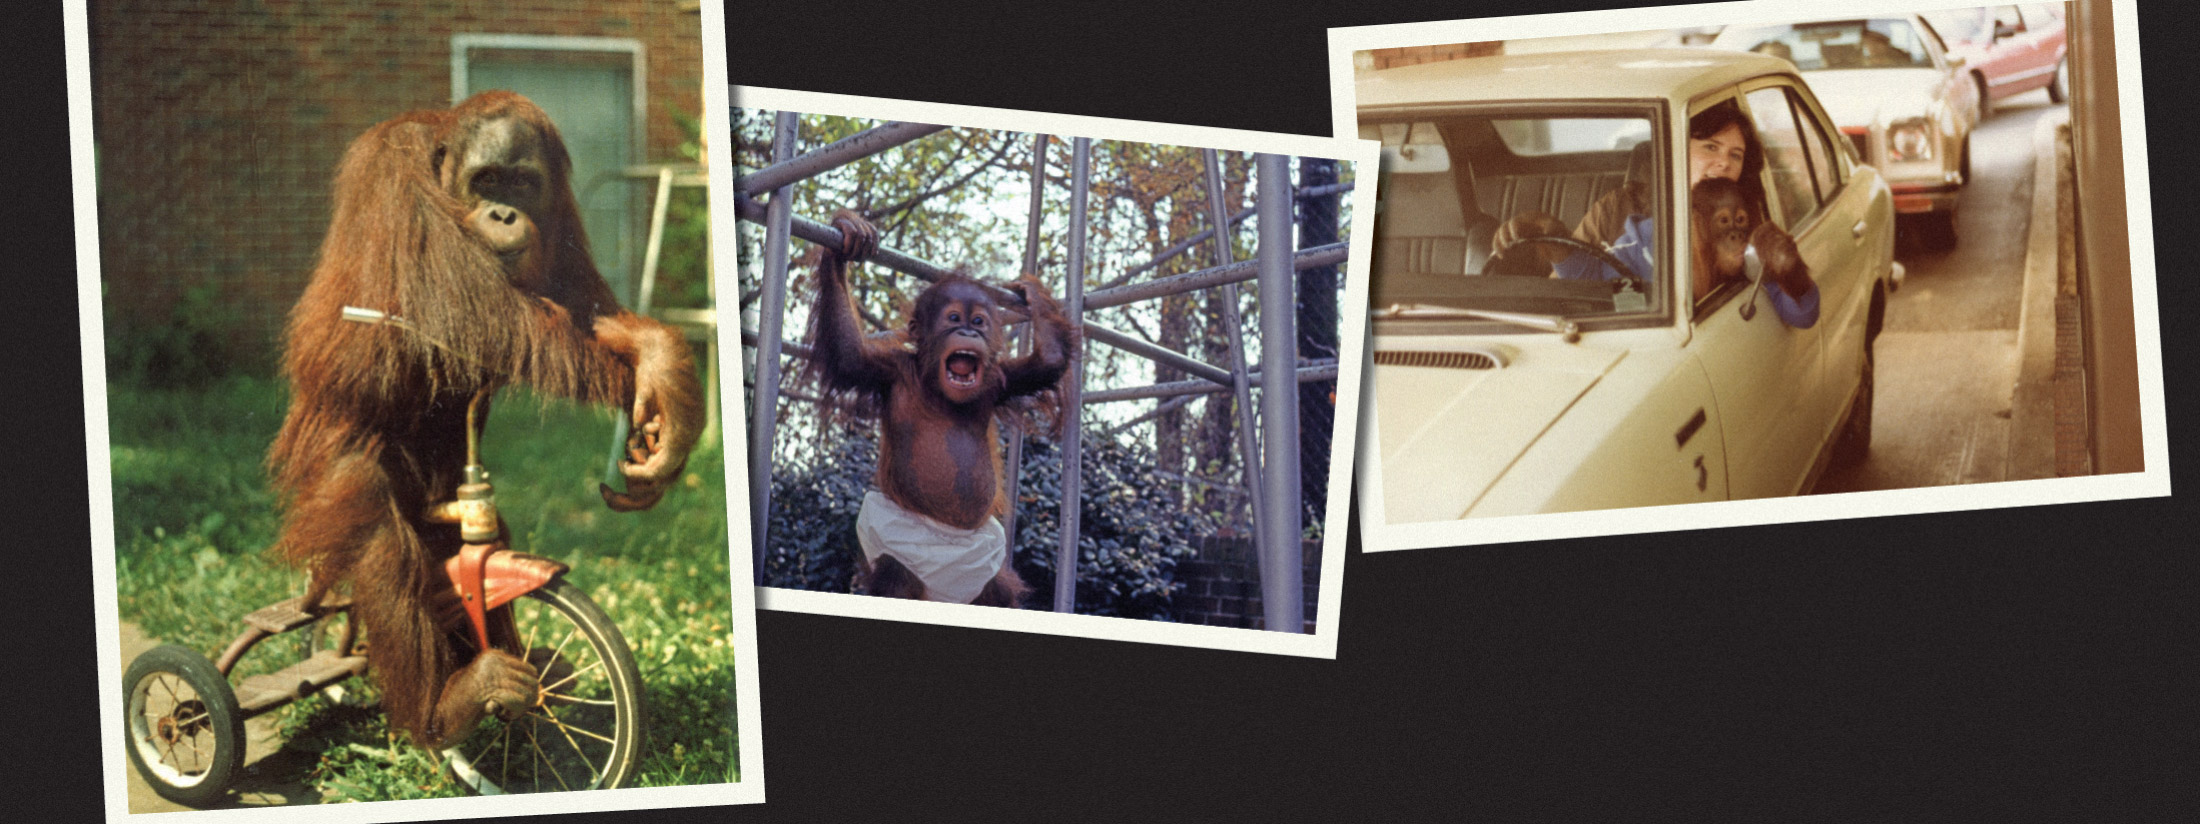 photos of a young orangutan with a tricycle and wearing a diaper on a jungle gym